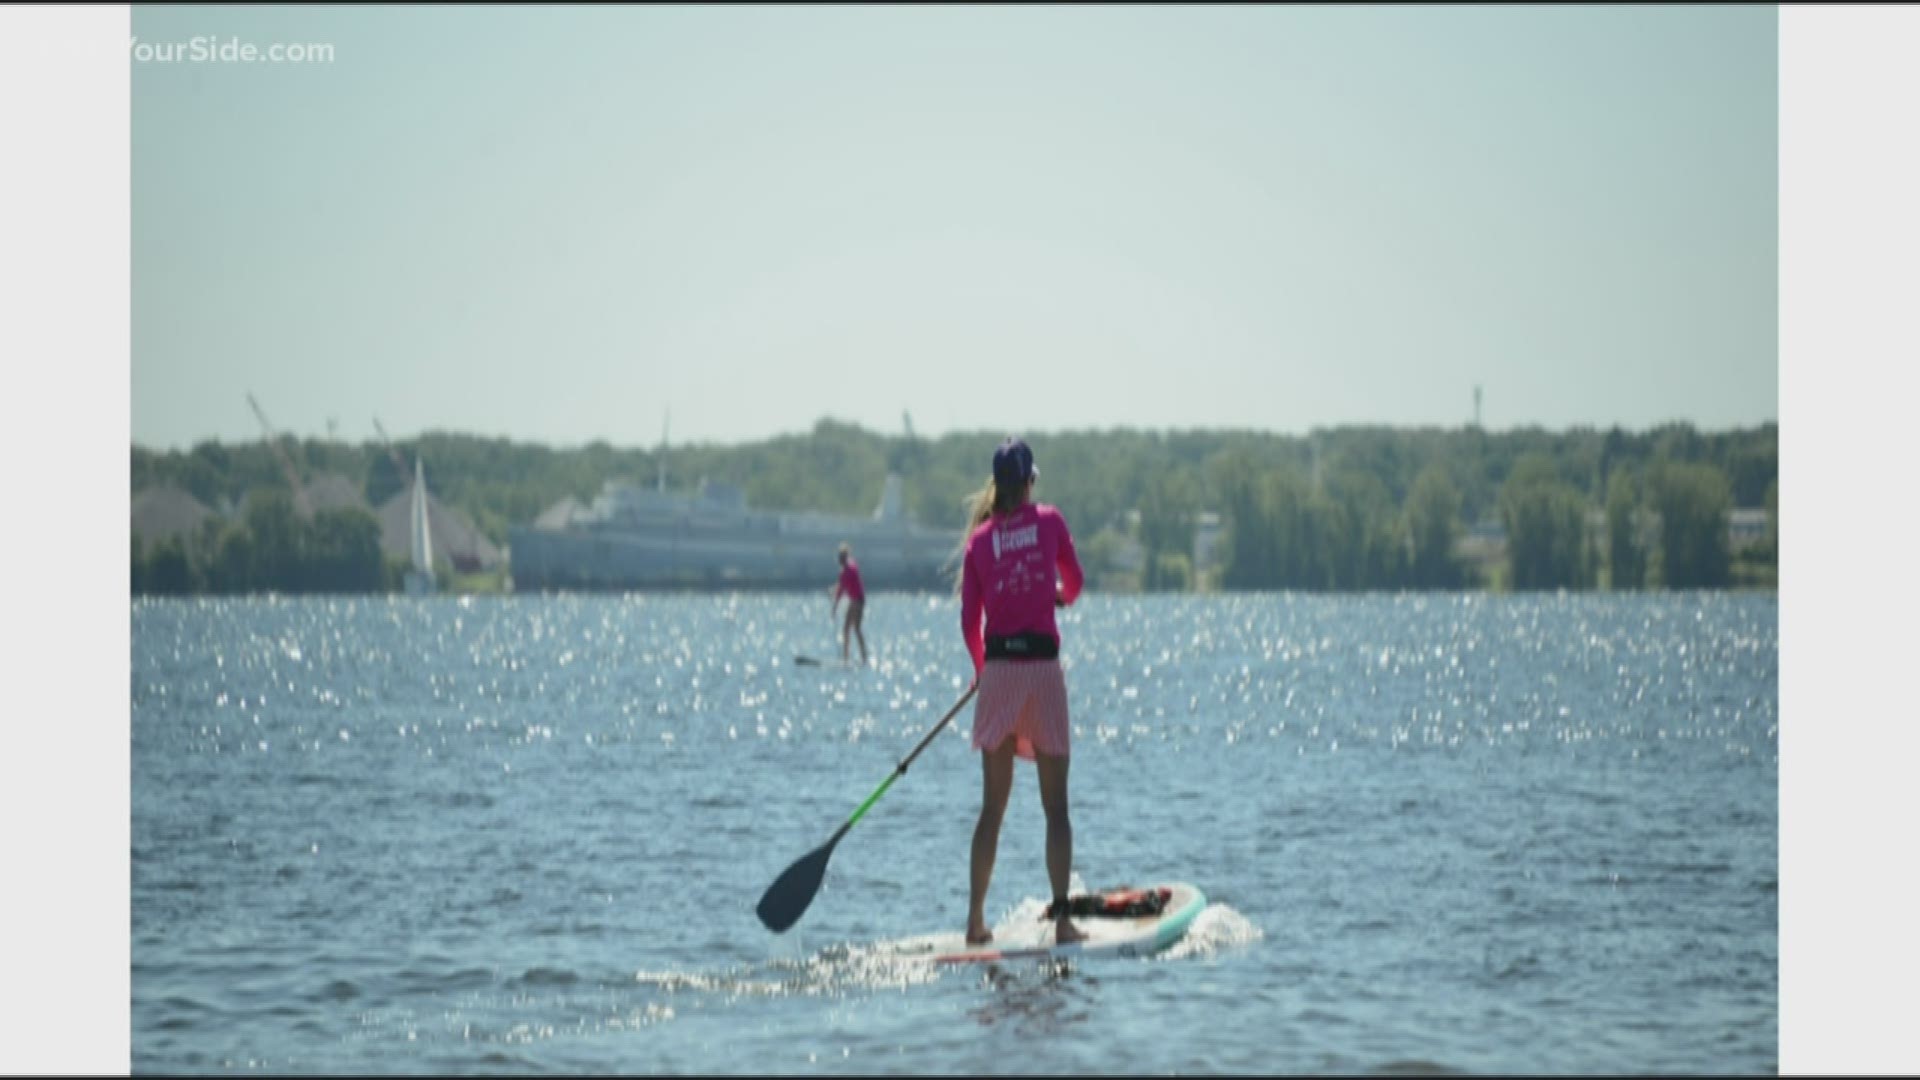 Paddleboarding fundraiser hits the beach in Muskegon.